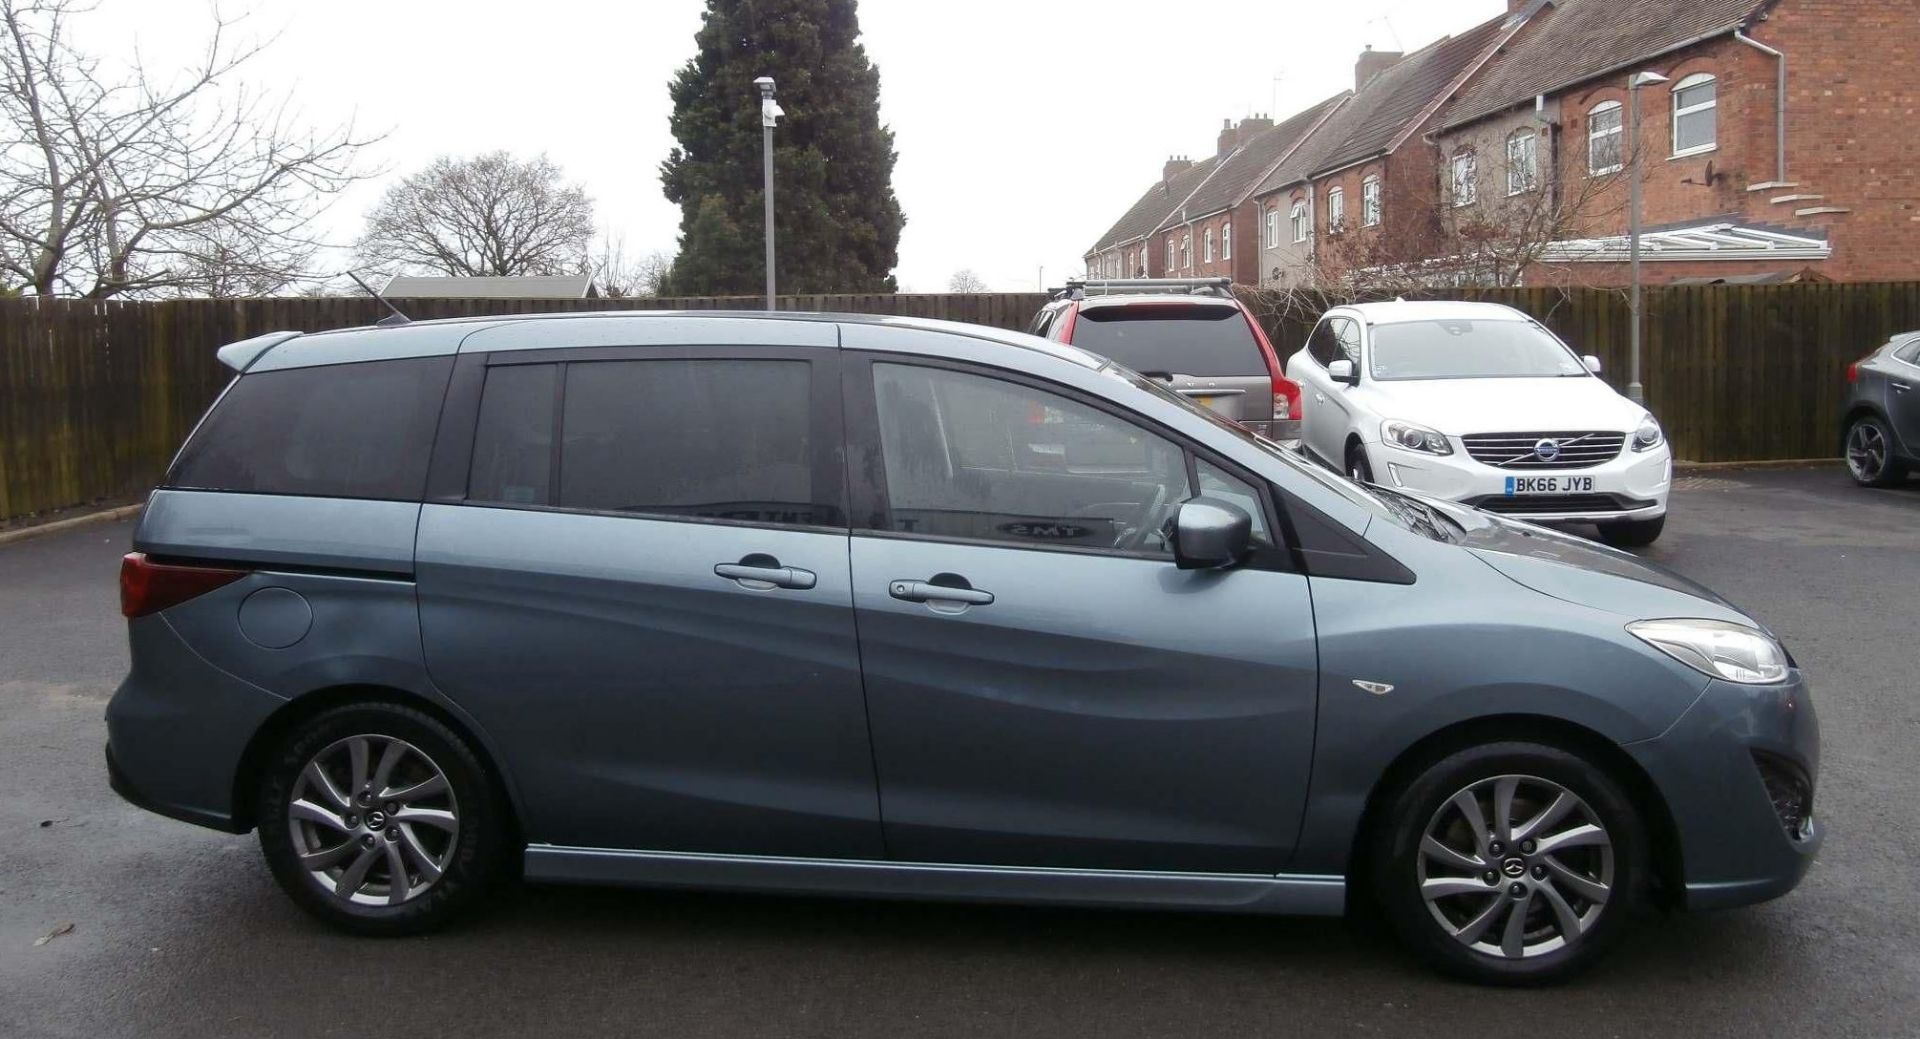 2013 Mazda 5 2.0 Venture Edition 5 Dr MPV - CL505 - NO VAT ON THE HAMMER - Location: Corby, N - Image 7 of 18